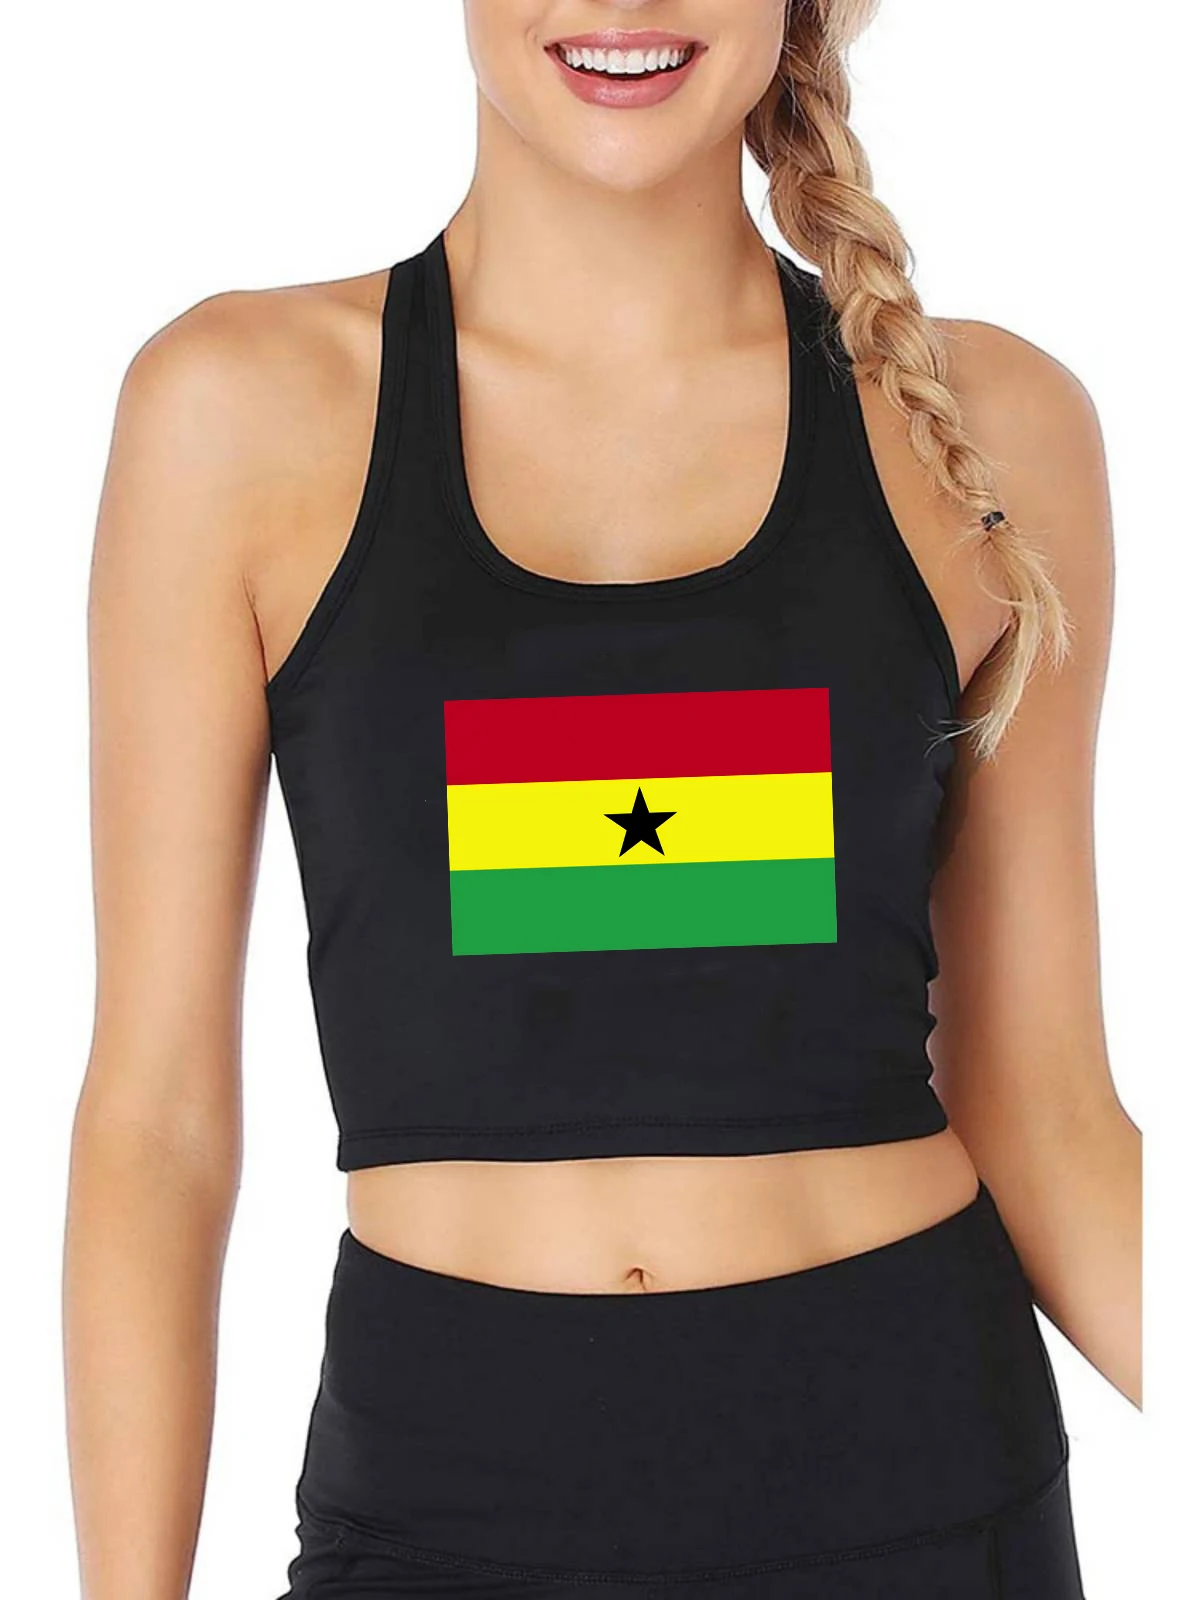 

National Flag of Ghana Graphics Design Sexy Slim Fit Crop Top Women's Retro Patriotic Memorial Style Tank Tops Fitness Camisole